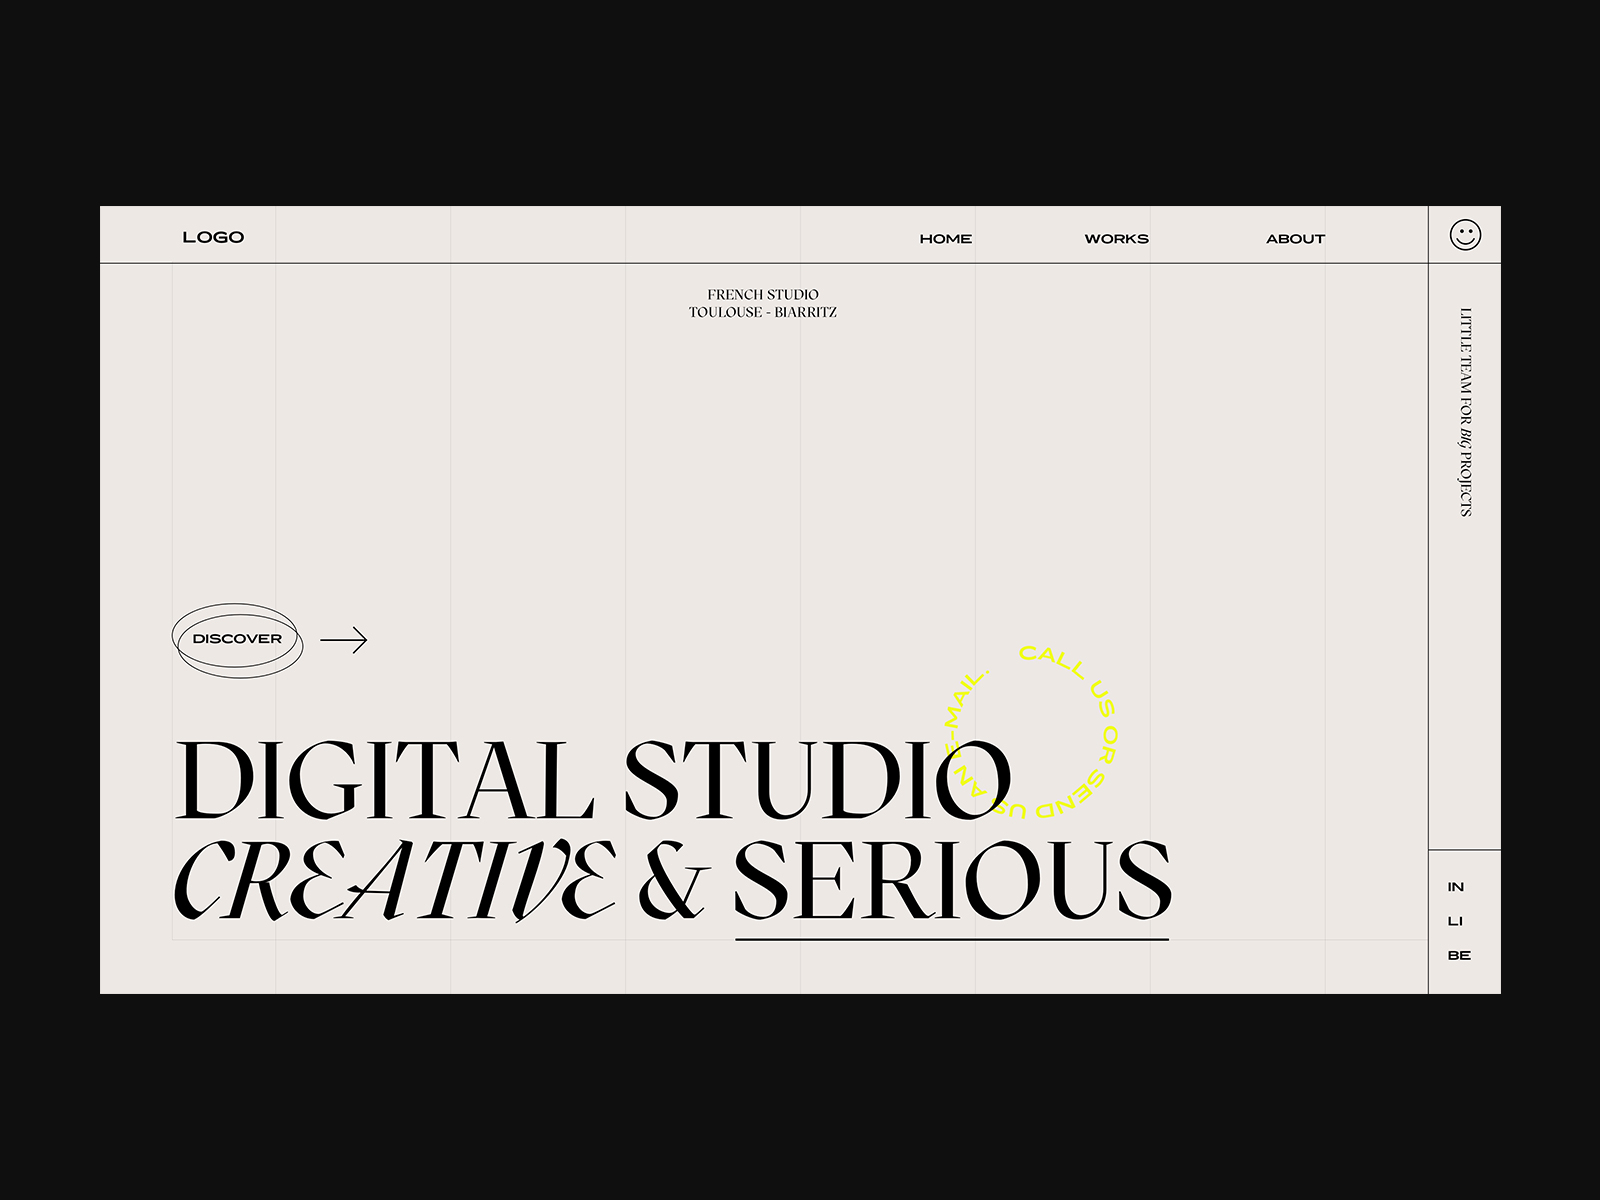 Research for a studio's site by Clarisse Michard on Dribbble